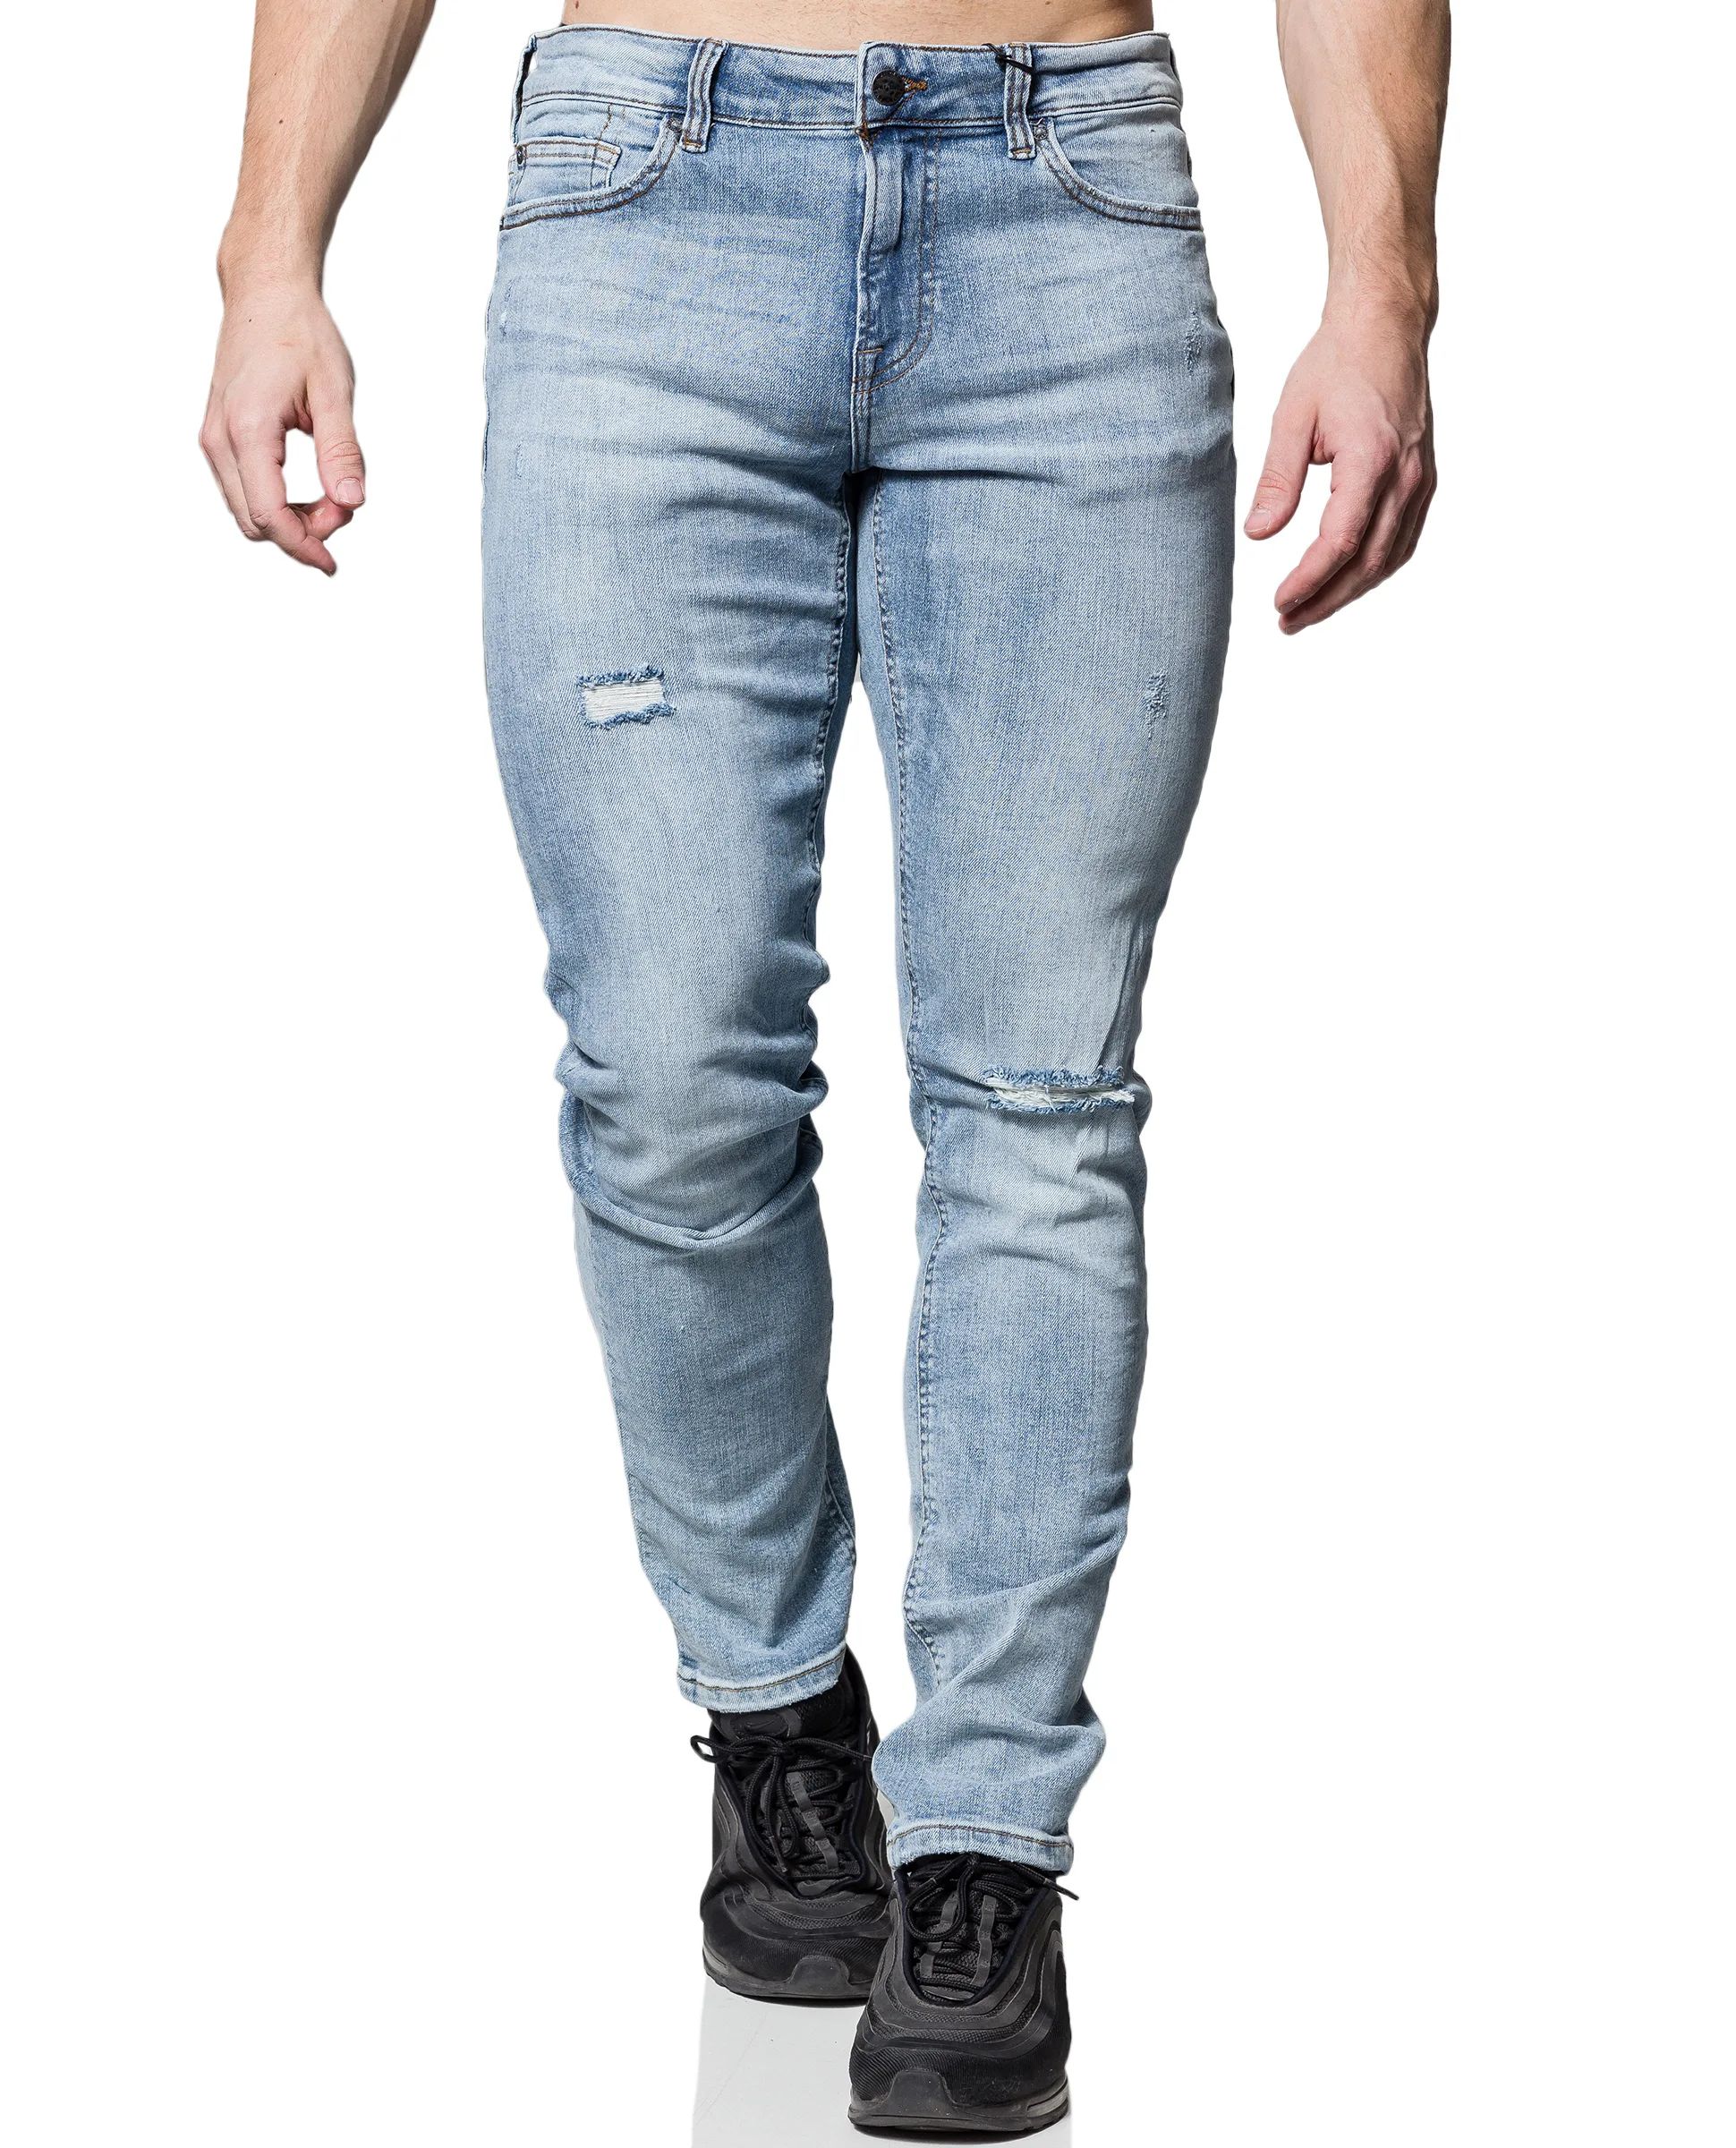 Loom Life Blue Damage Spring Only & Sons - 1898 - Jeans - Jerone.com